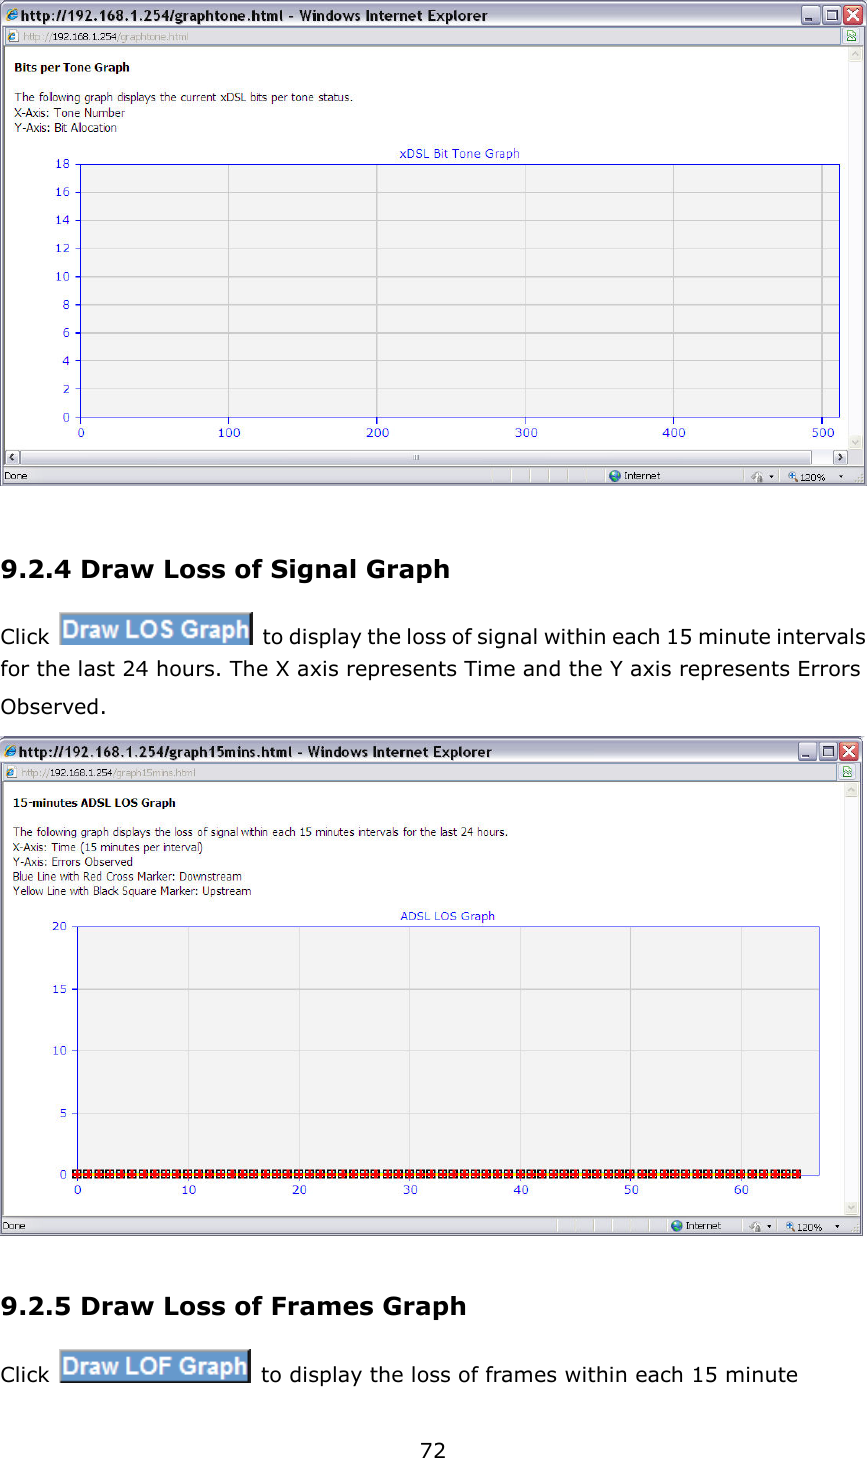 72    9.2.4 Draw Loss of Signal Graph Click    to display the loss of signal within each 15 minute intervals for the last 24 hours. The X axis represents Time and the Y axis represents Errors Observed.  9.2.5 Draw Loss of Frames Graph Click    to display the loss of frames within each 15 minute 